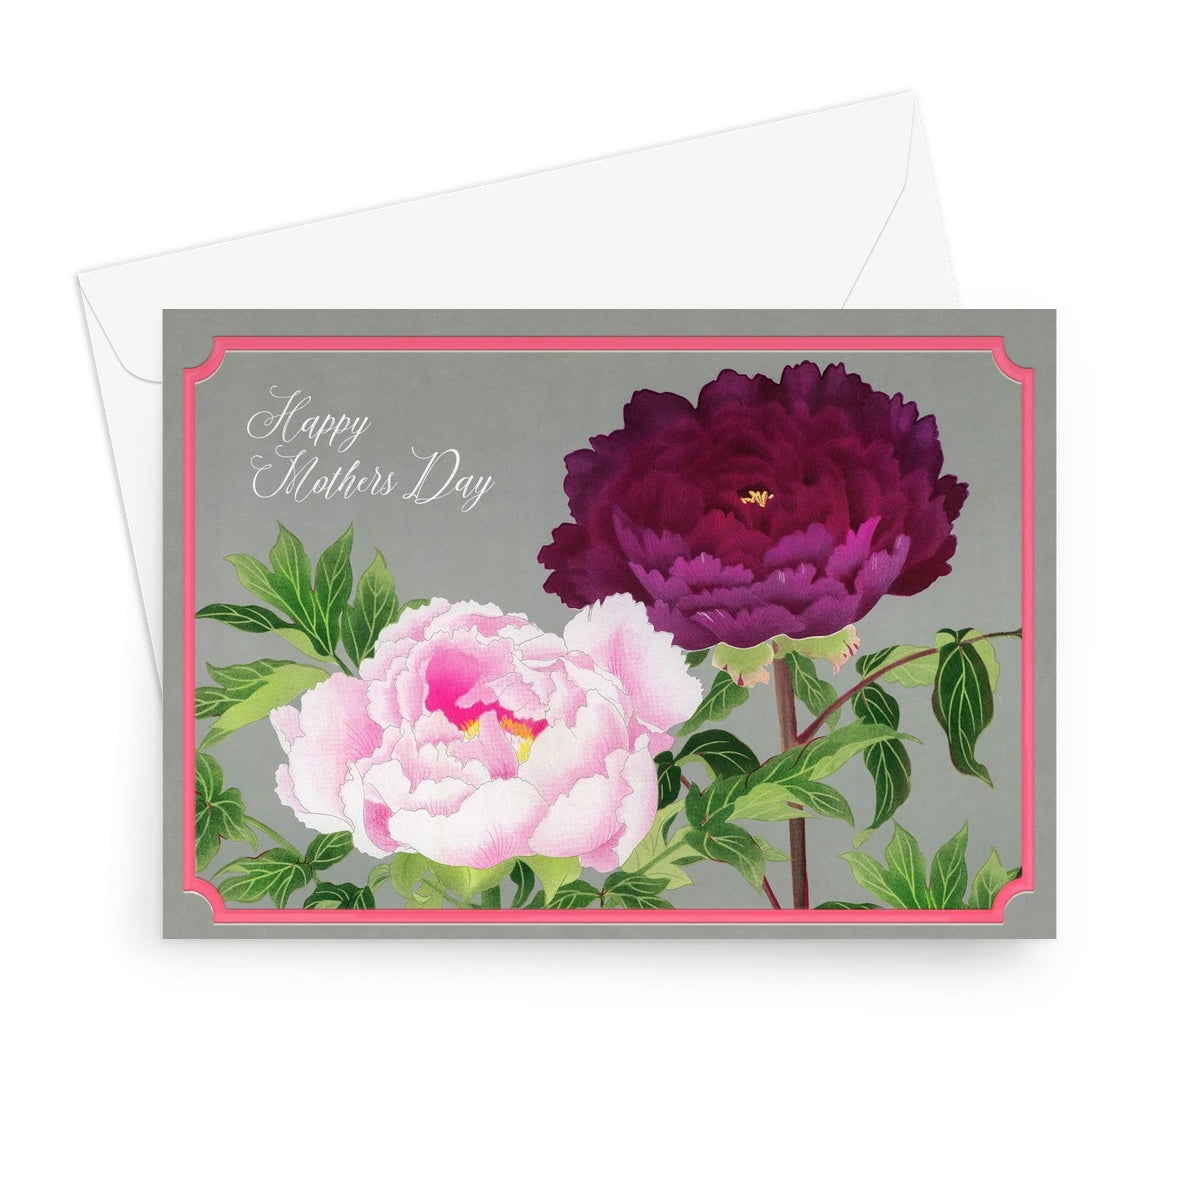 Japanese mothers day card, Japanese floral mothers day card, flower card, floral mothers day card.